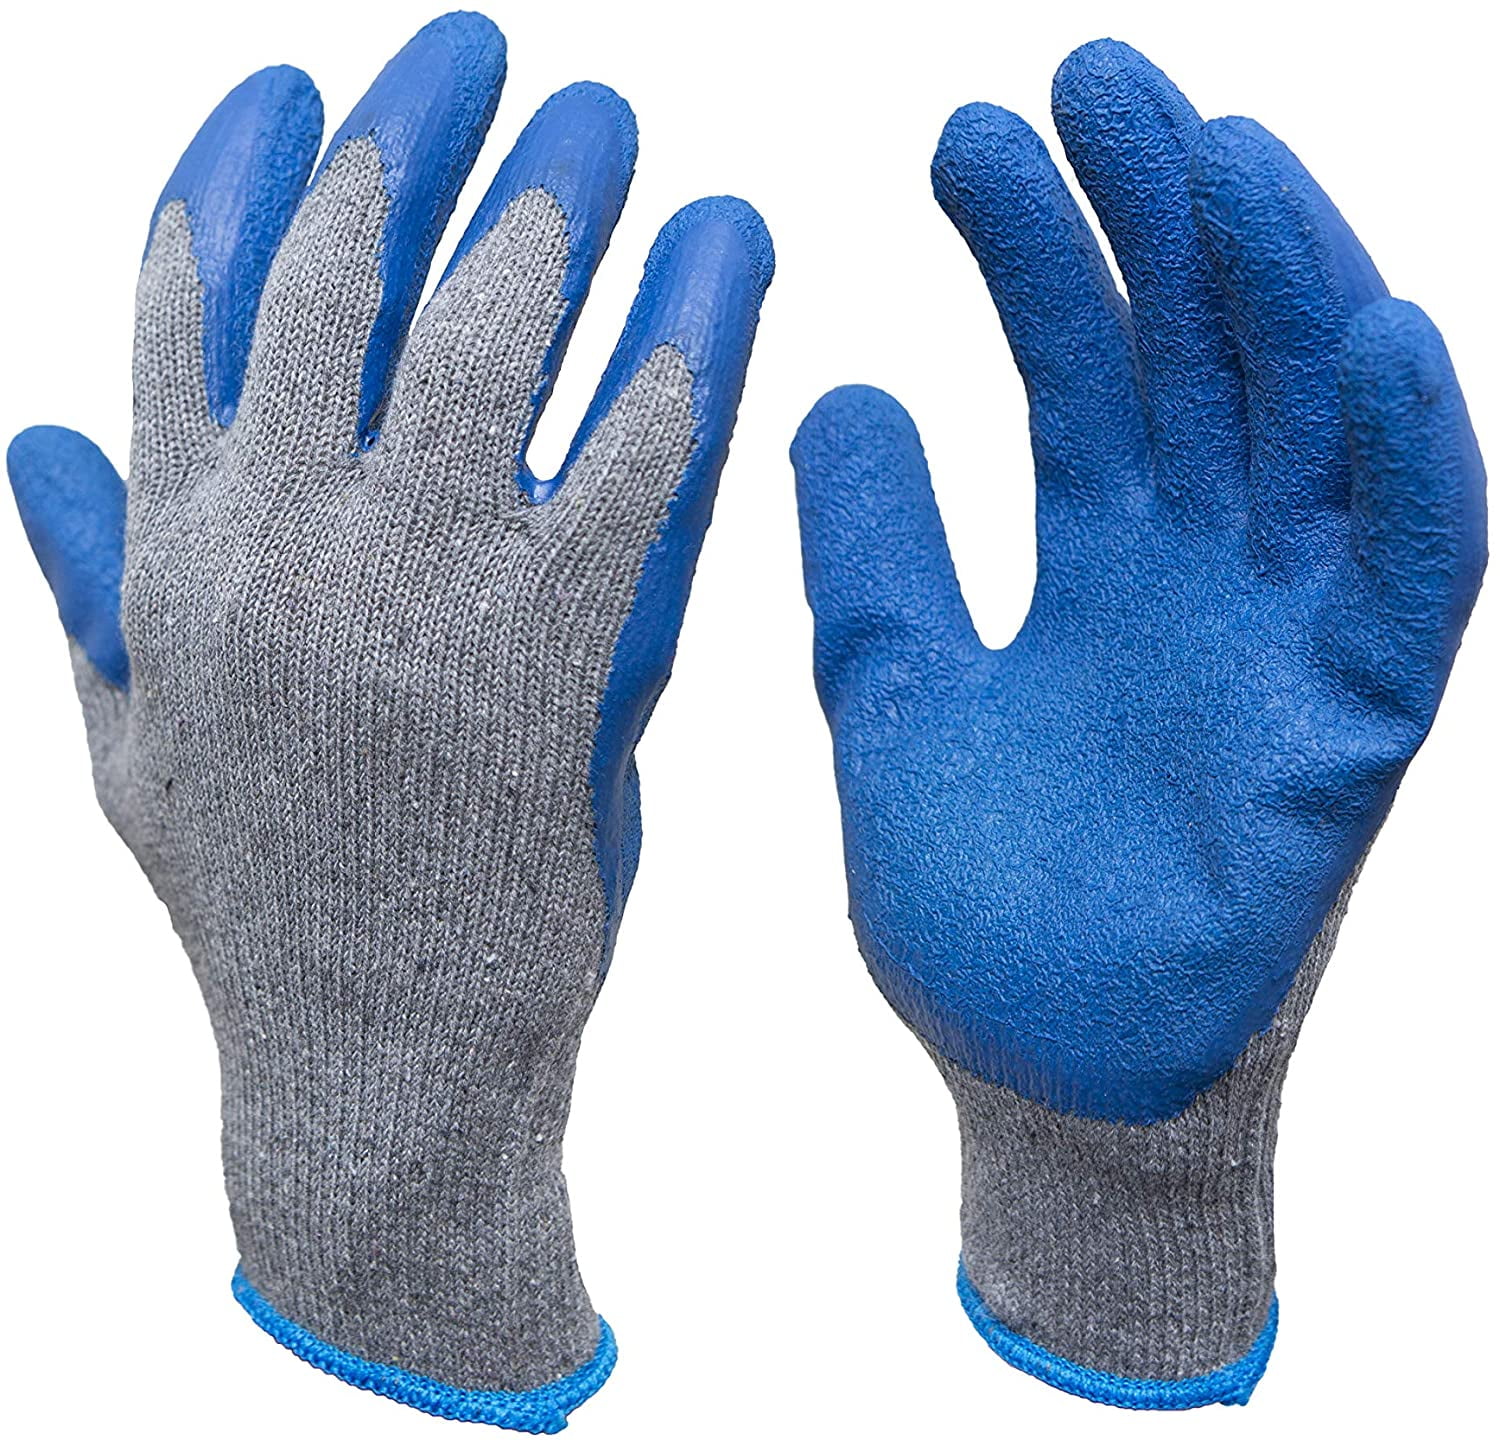 Leather Work Gloves Cotton Knitted Fabric Worth Garden 2 Pairs Fabric & Leather Outdoor Working Gloves 